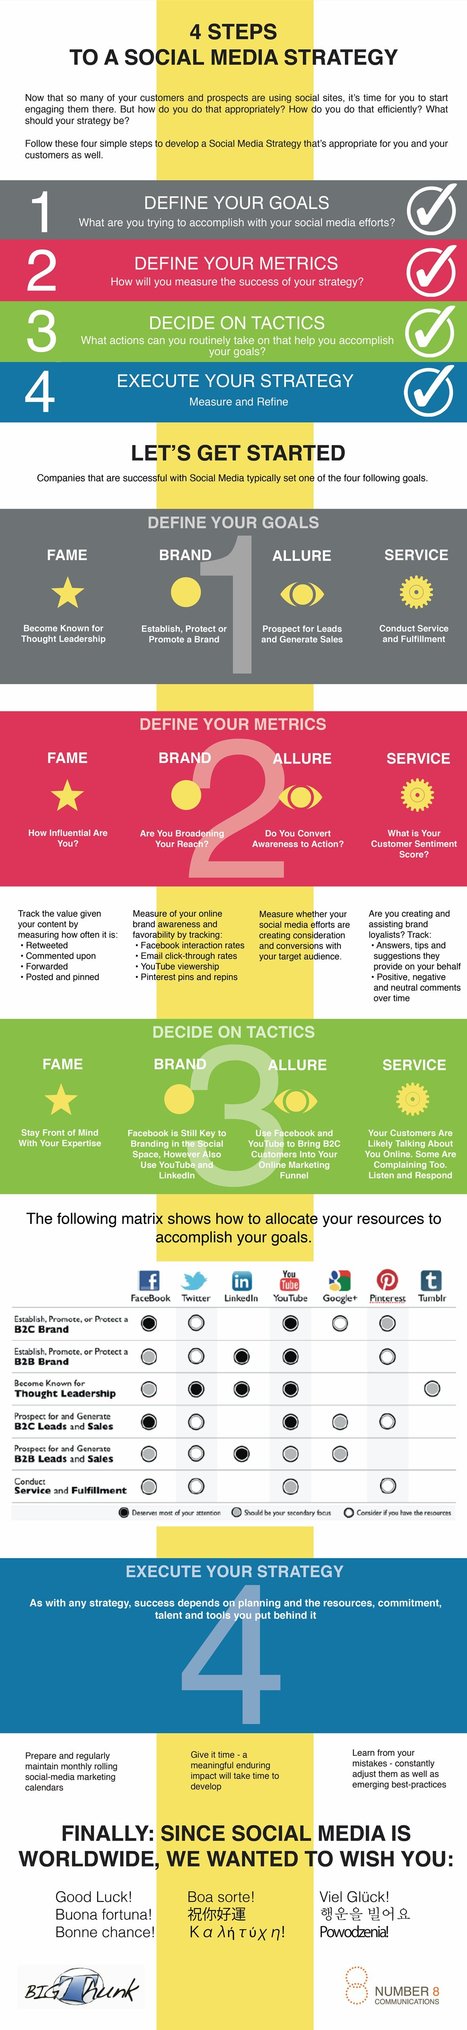 Four Steps to a Social Media Strategy [Infographic] | Web 2.0 for juandoming | Scoop.it